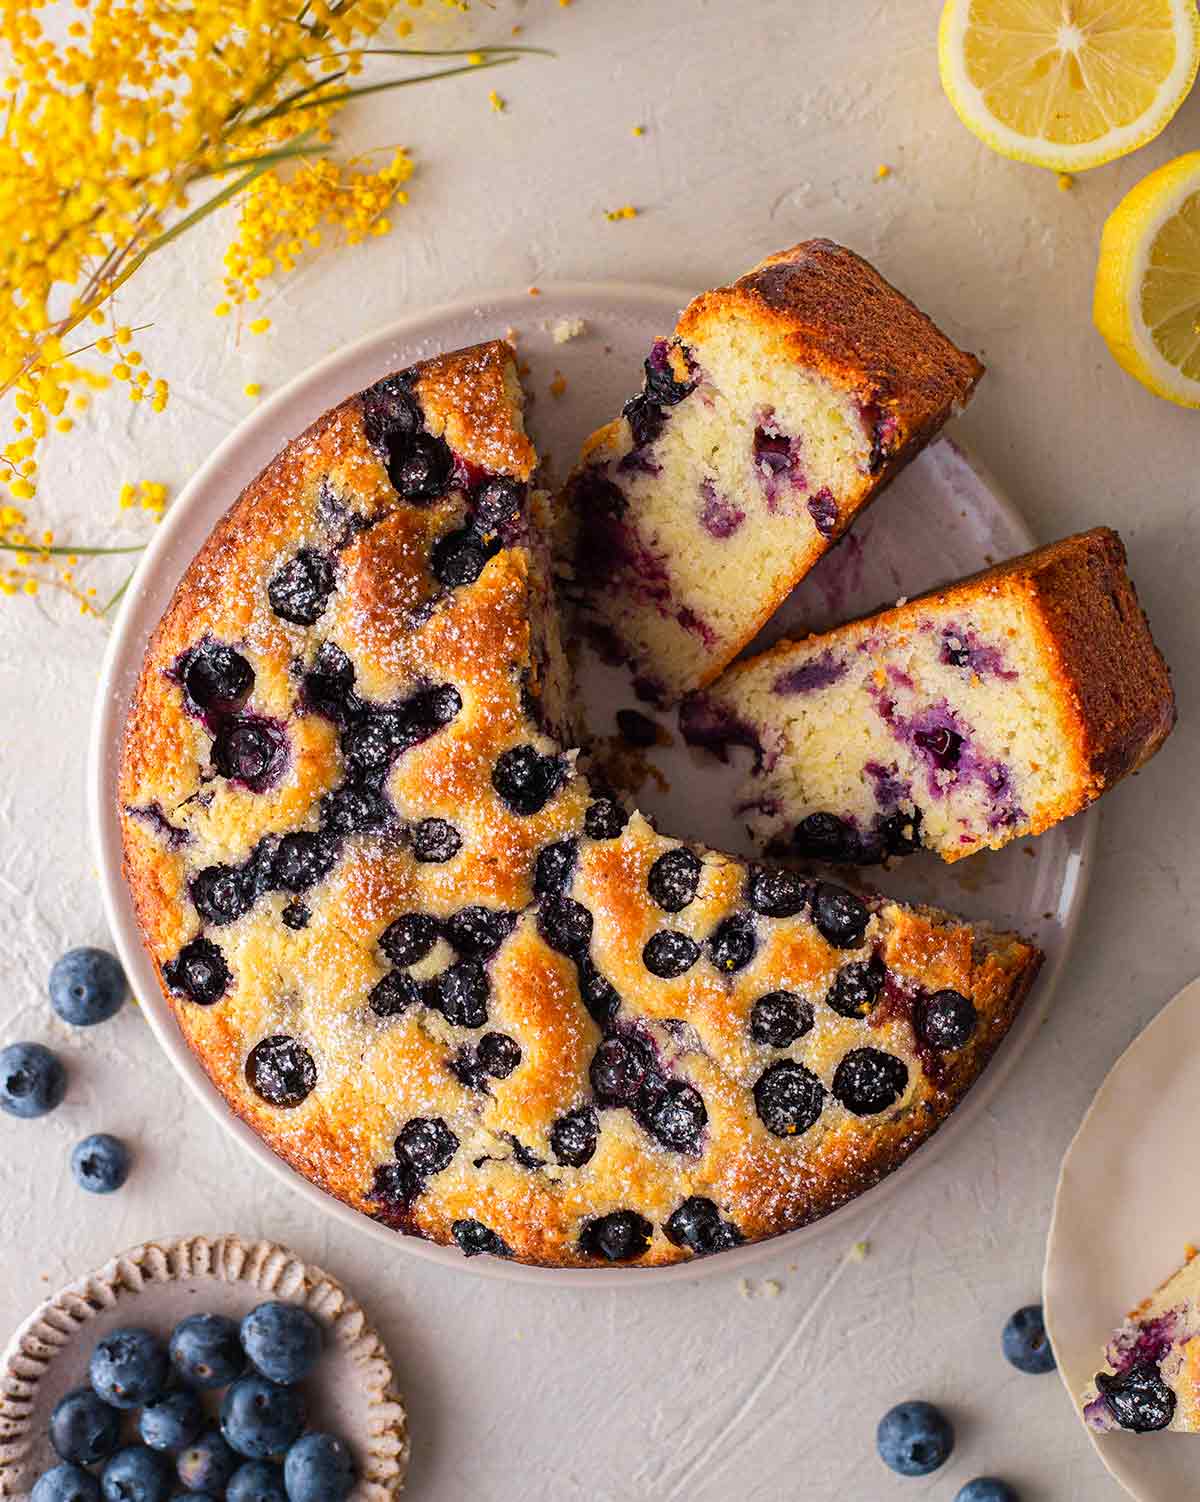 Vegan lemon blueberry cake on plate with two slices coming out showing fluffy golden texture.